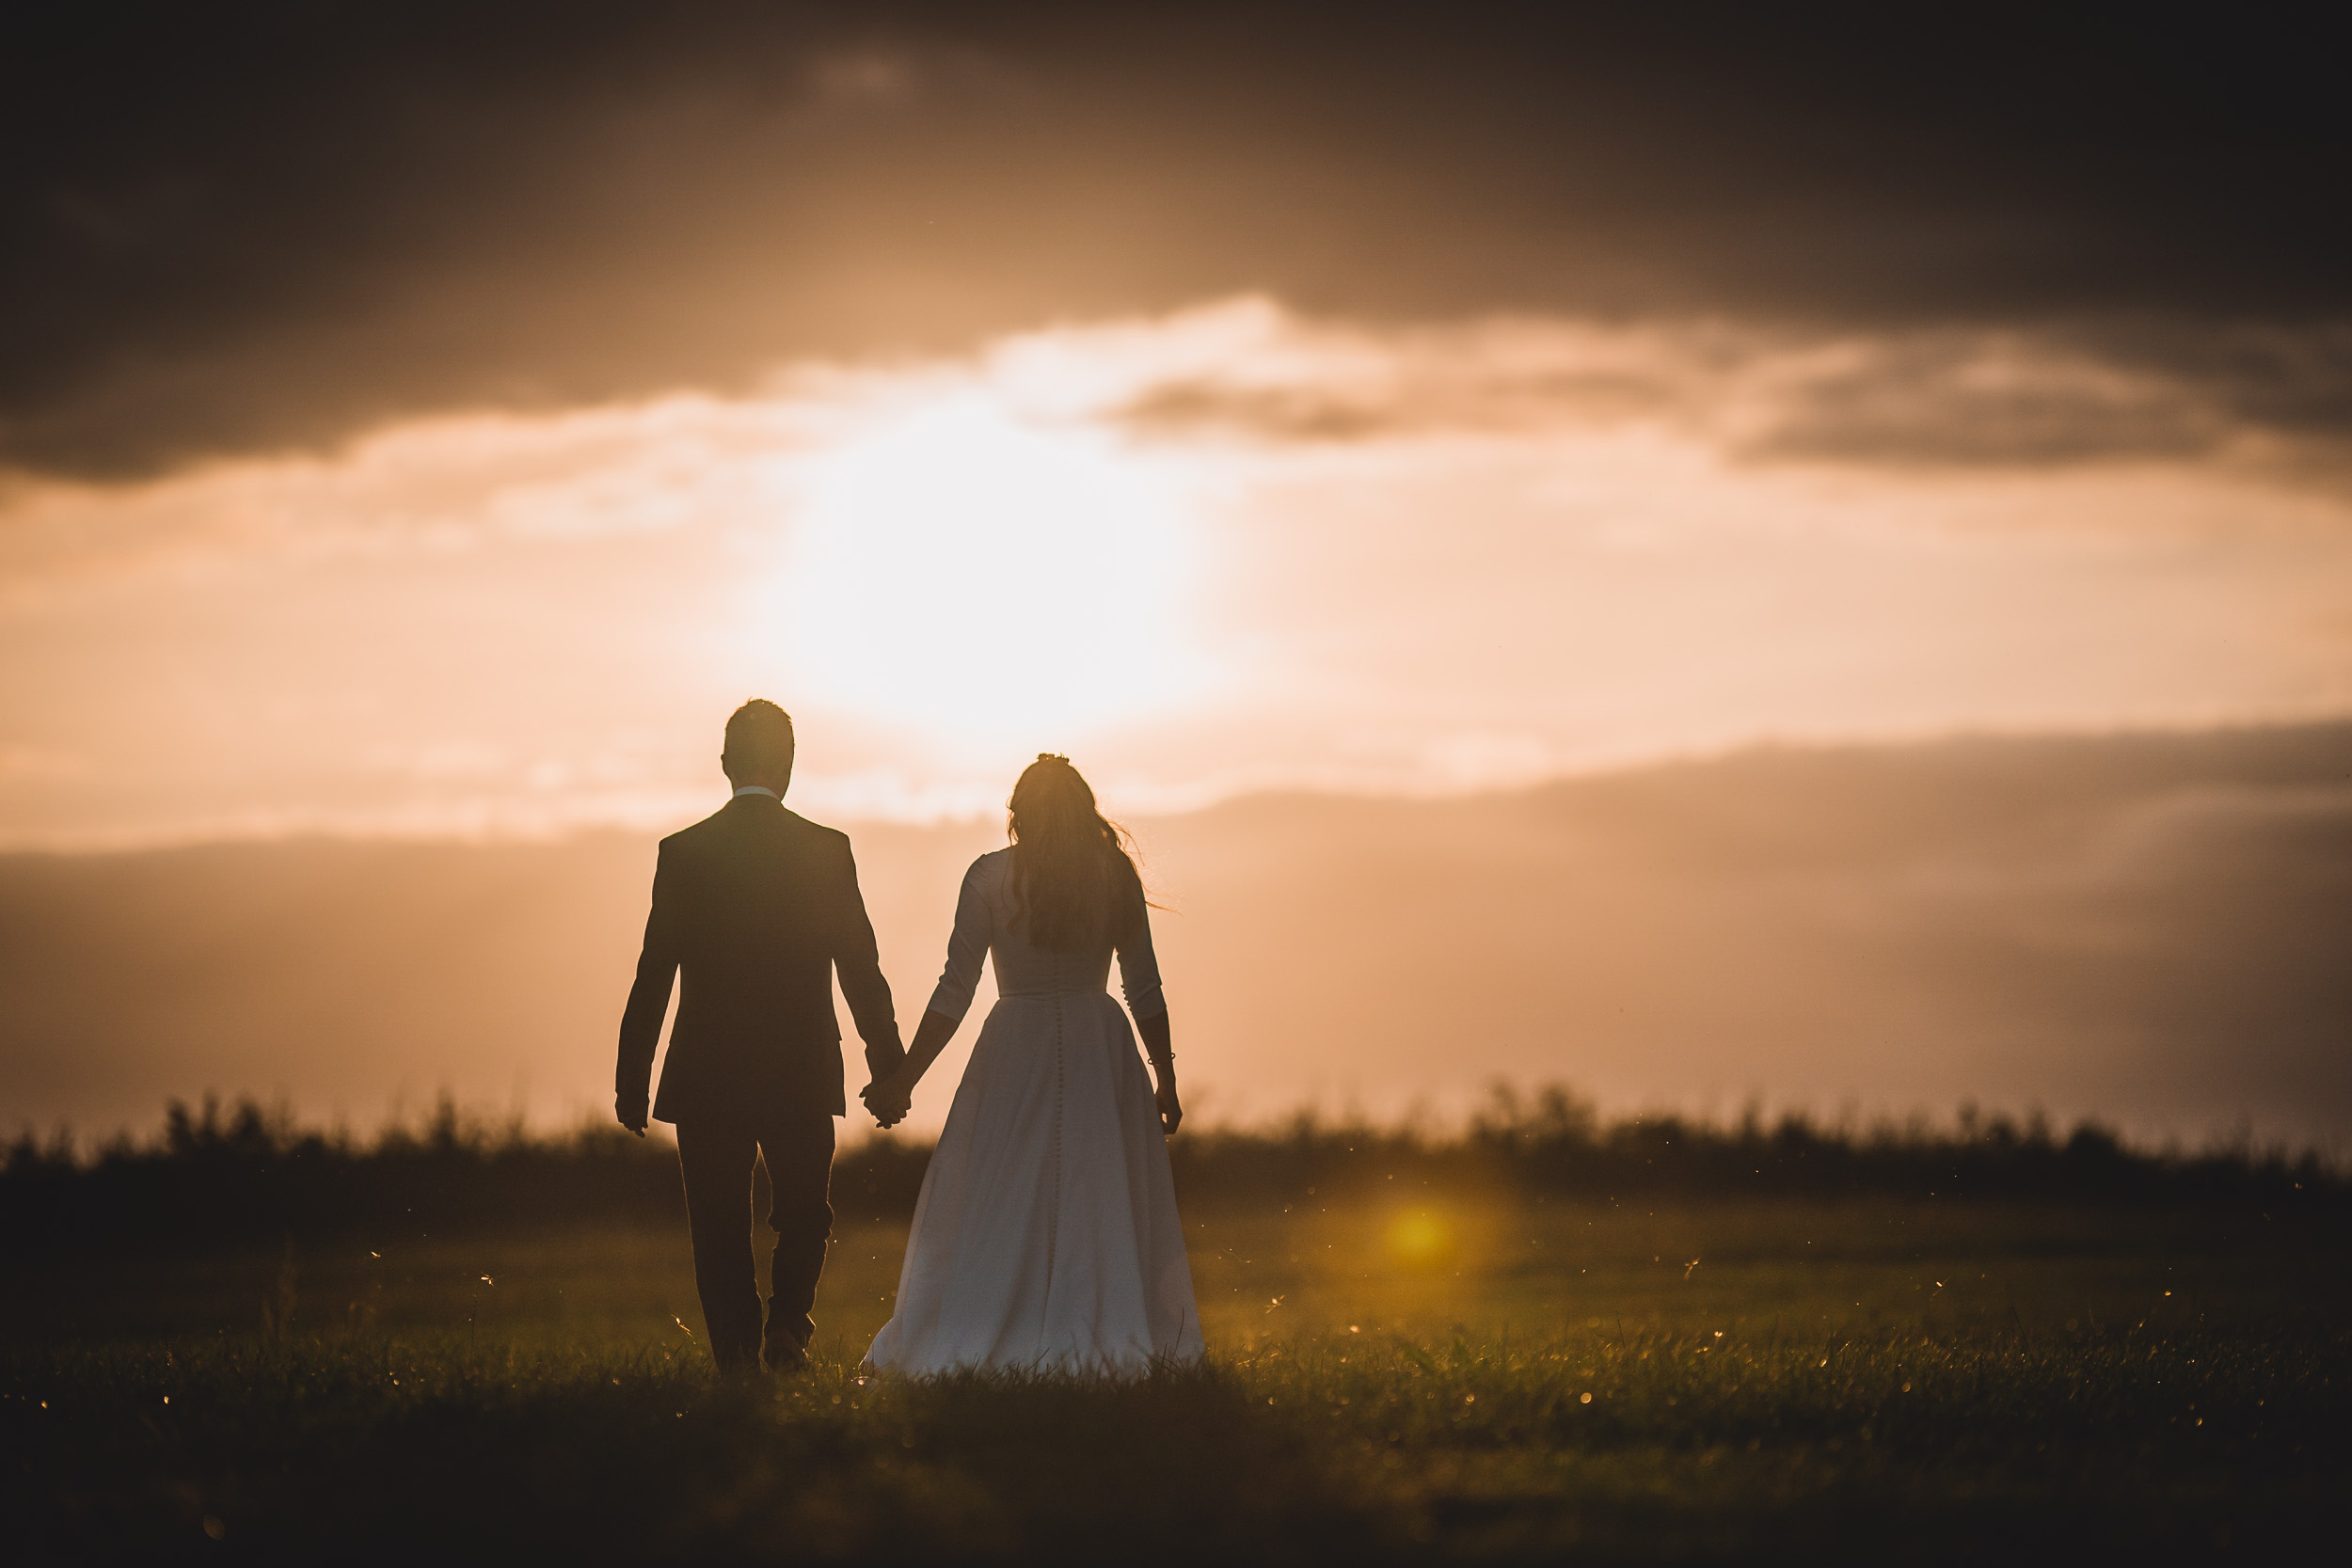 A stunning wedding photo of a bride and groom walking in a field at sunset, captured by a talented wedding photographer.